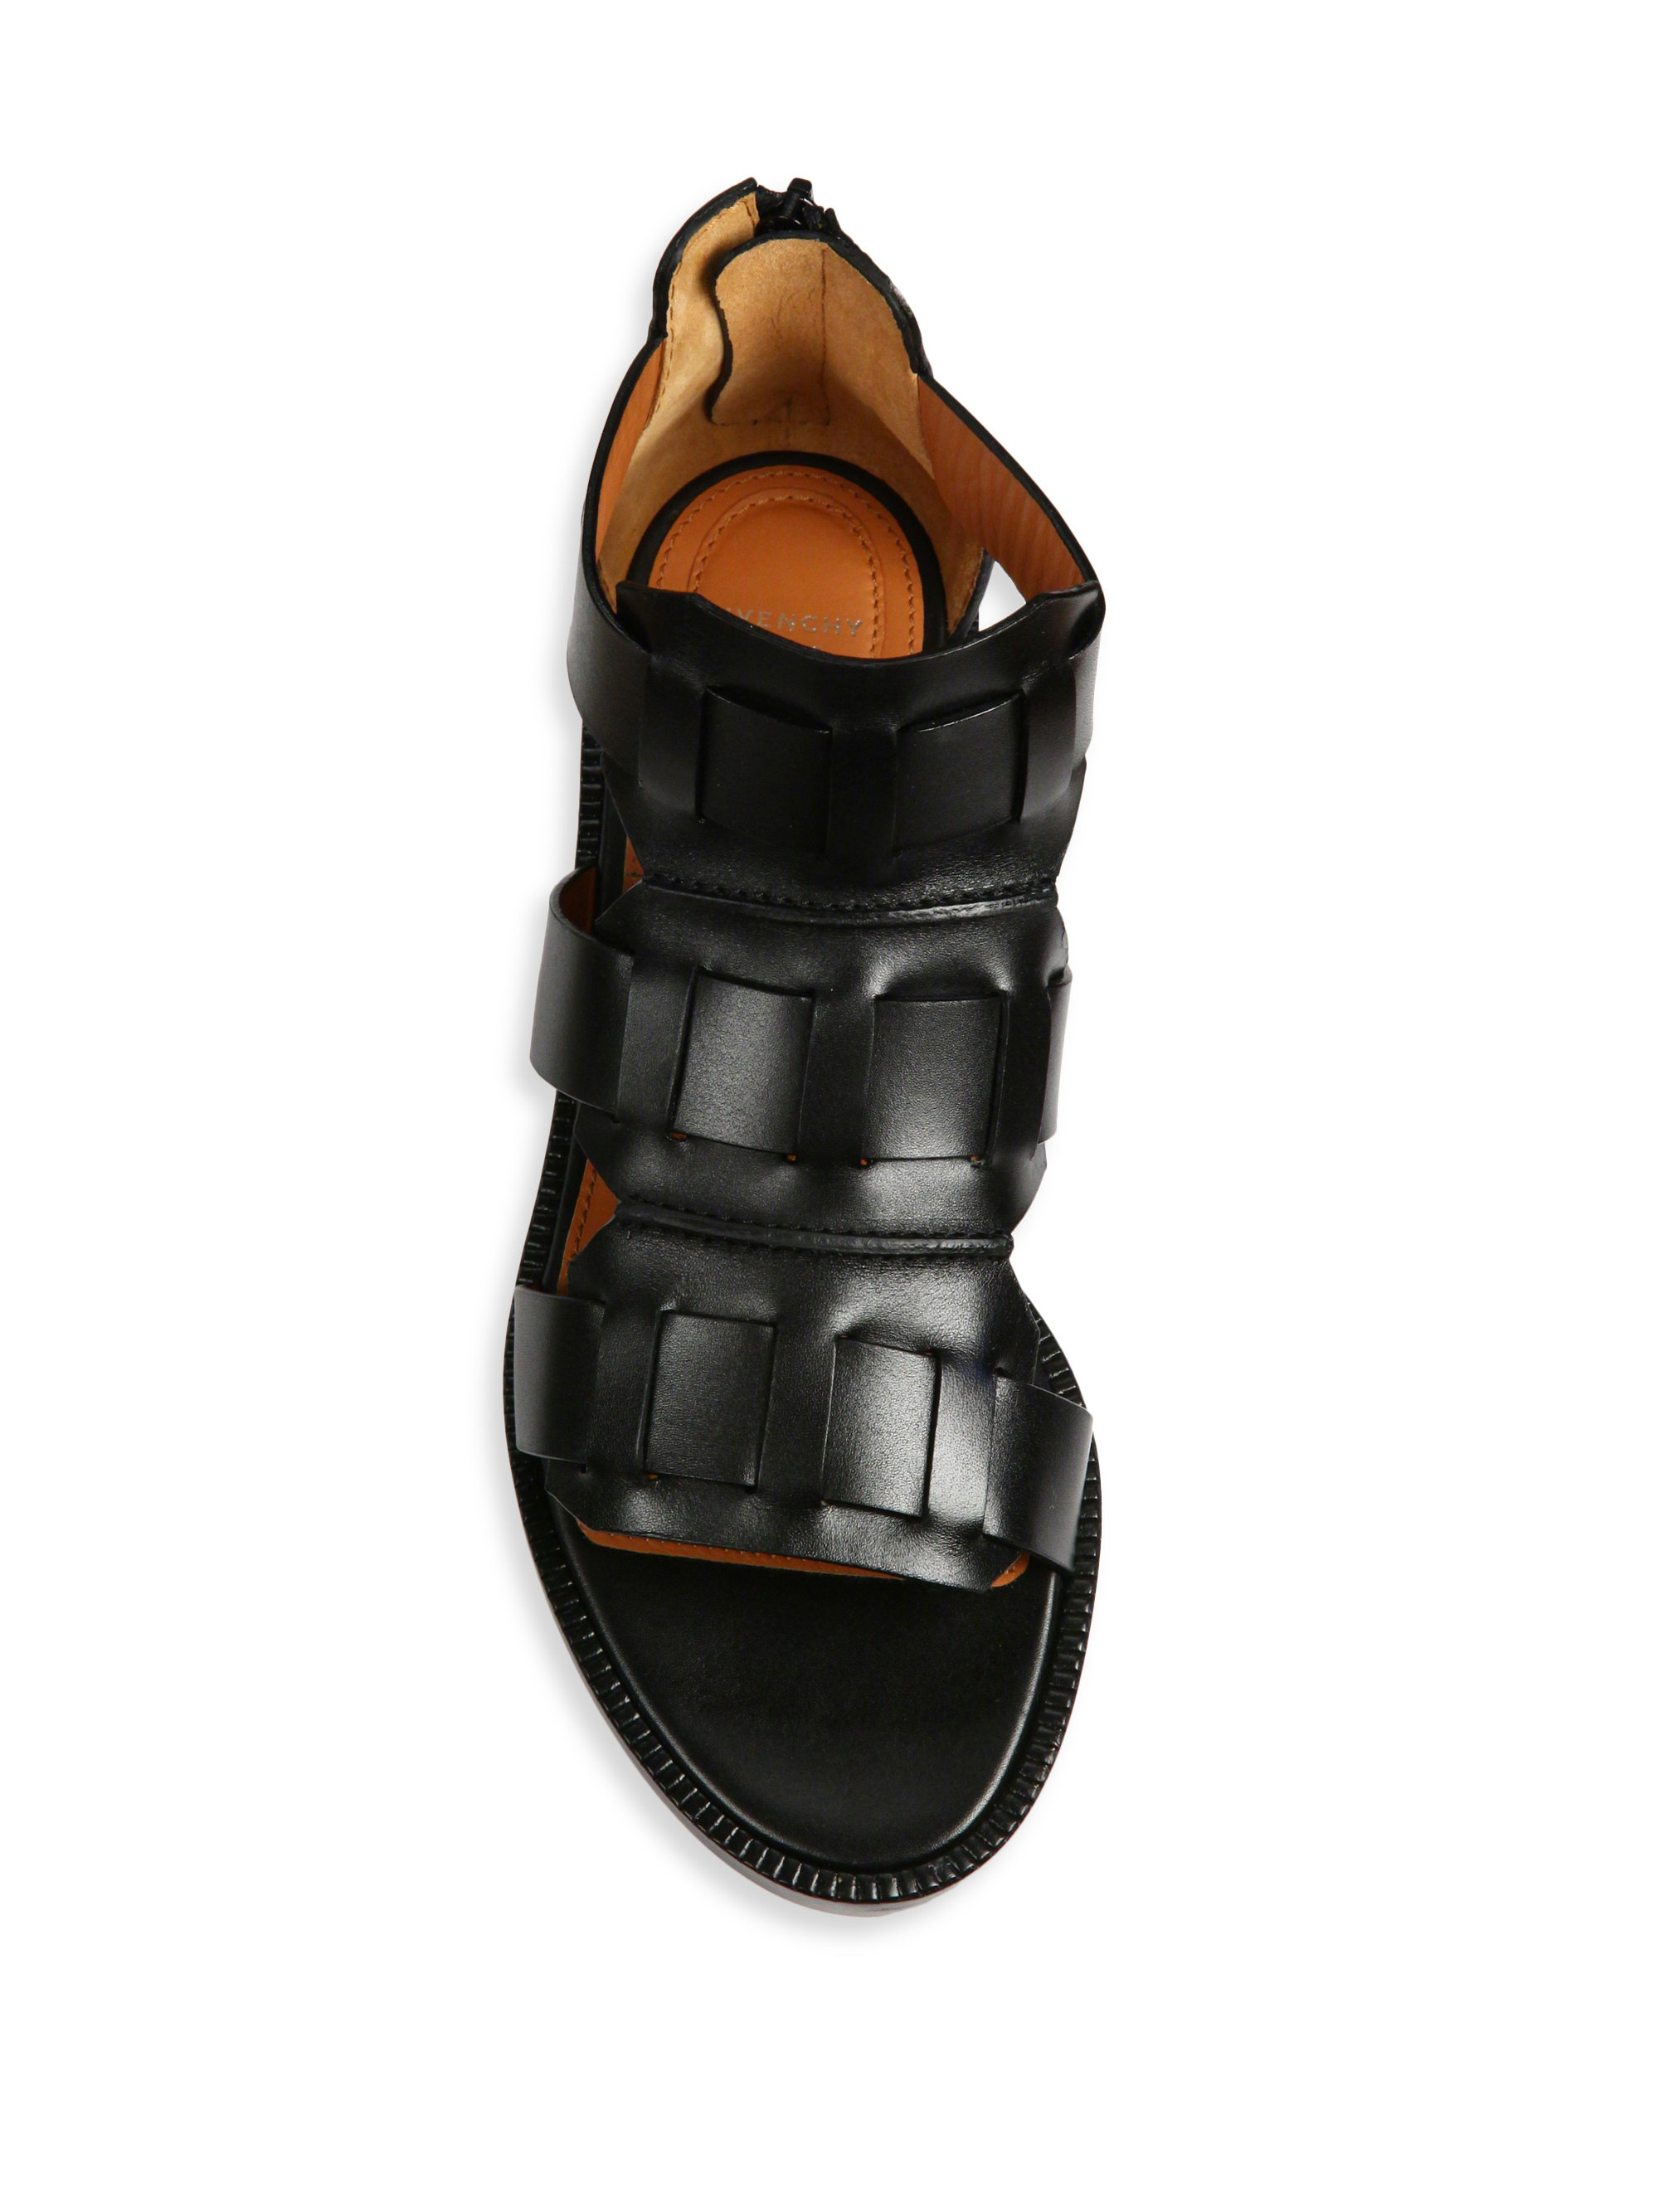 Givenchy Sode Line Leather Flat Sandals in Black | Lyst